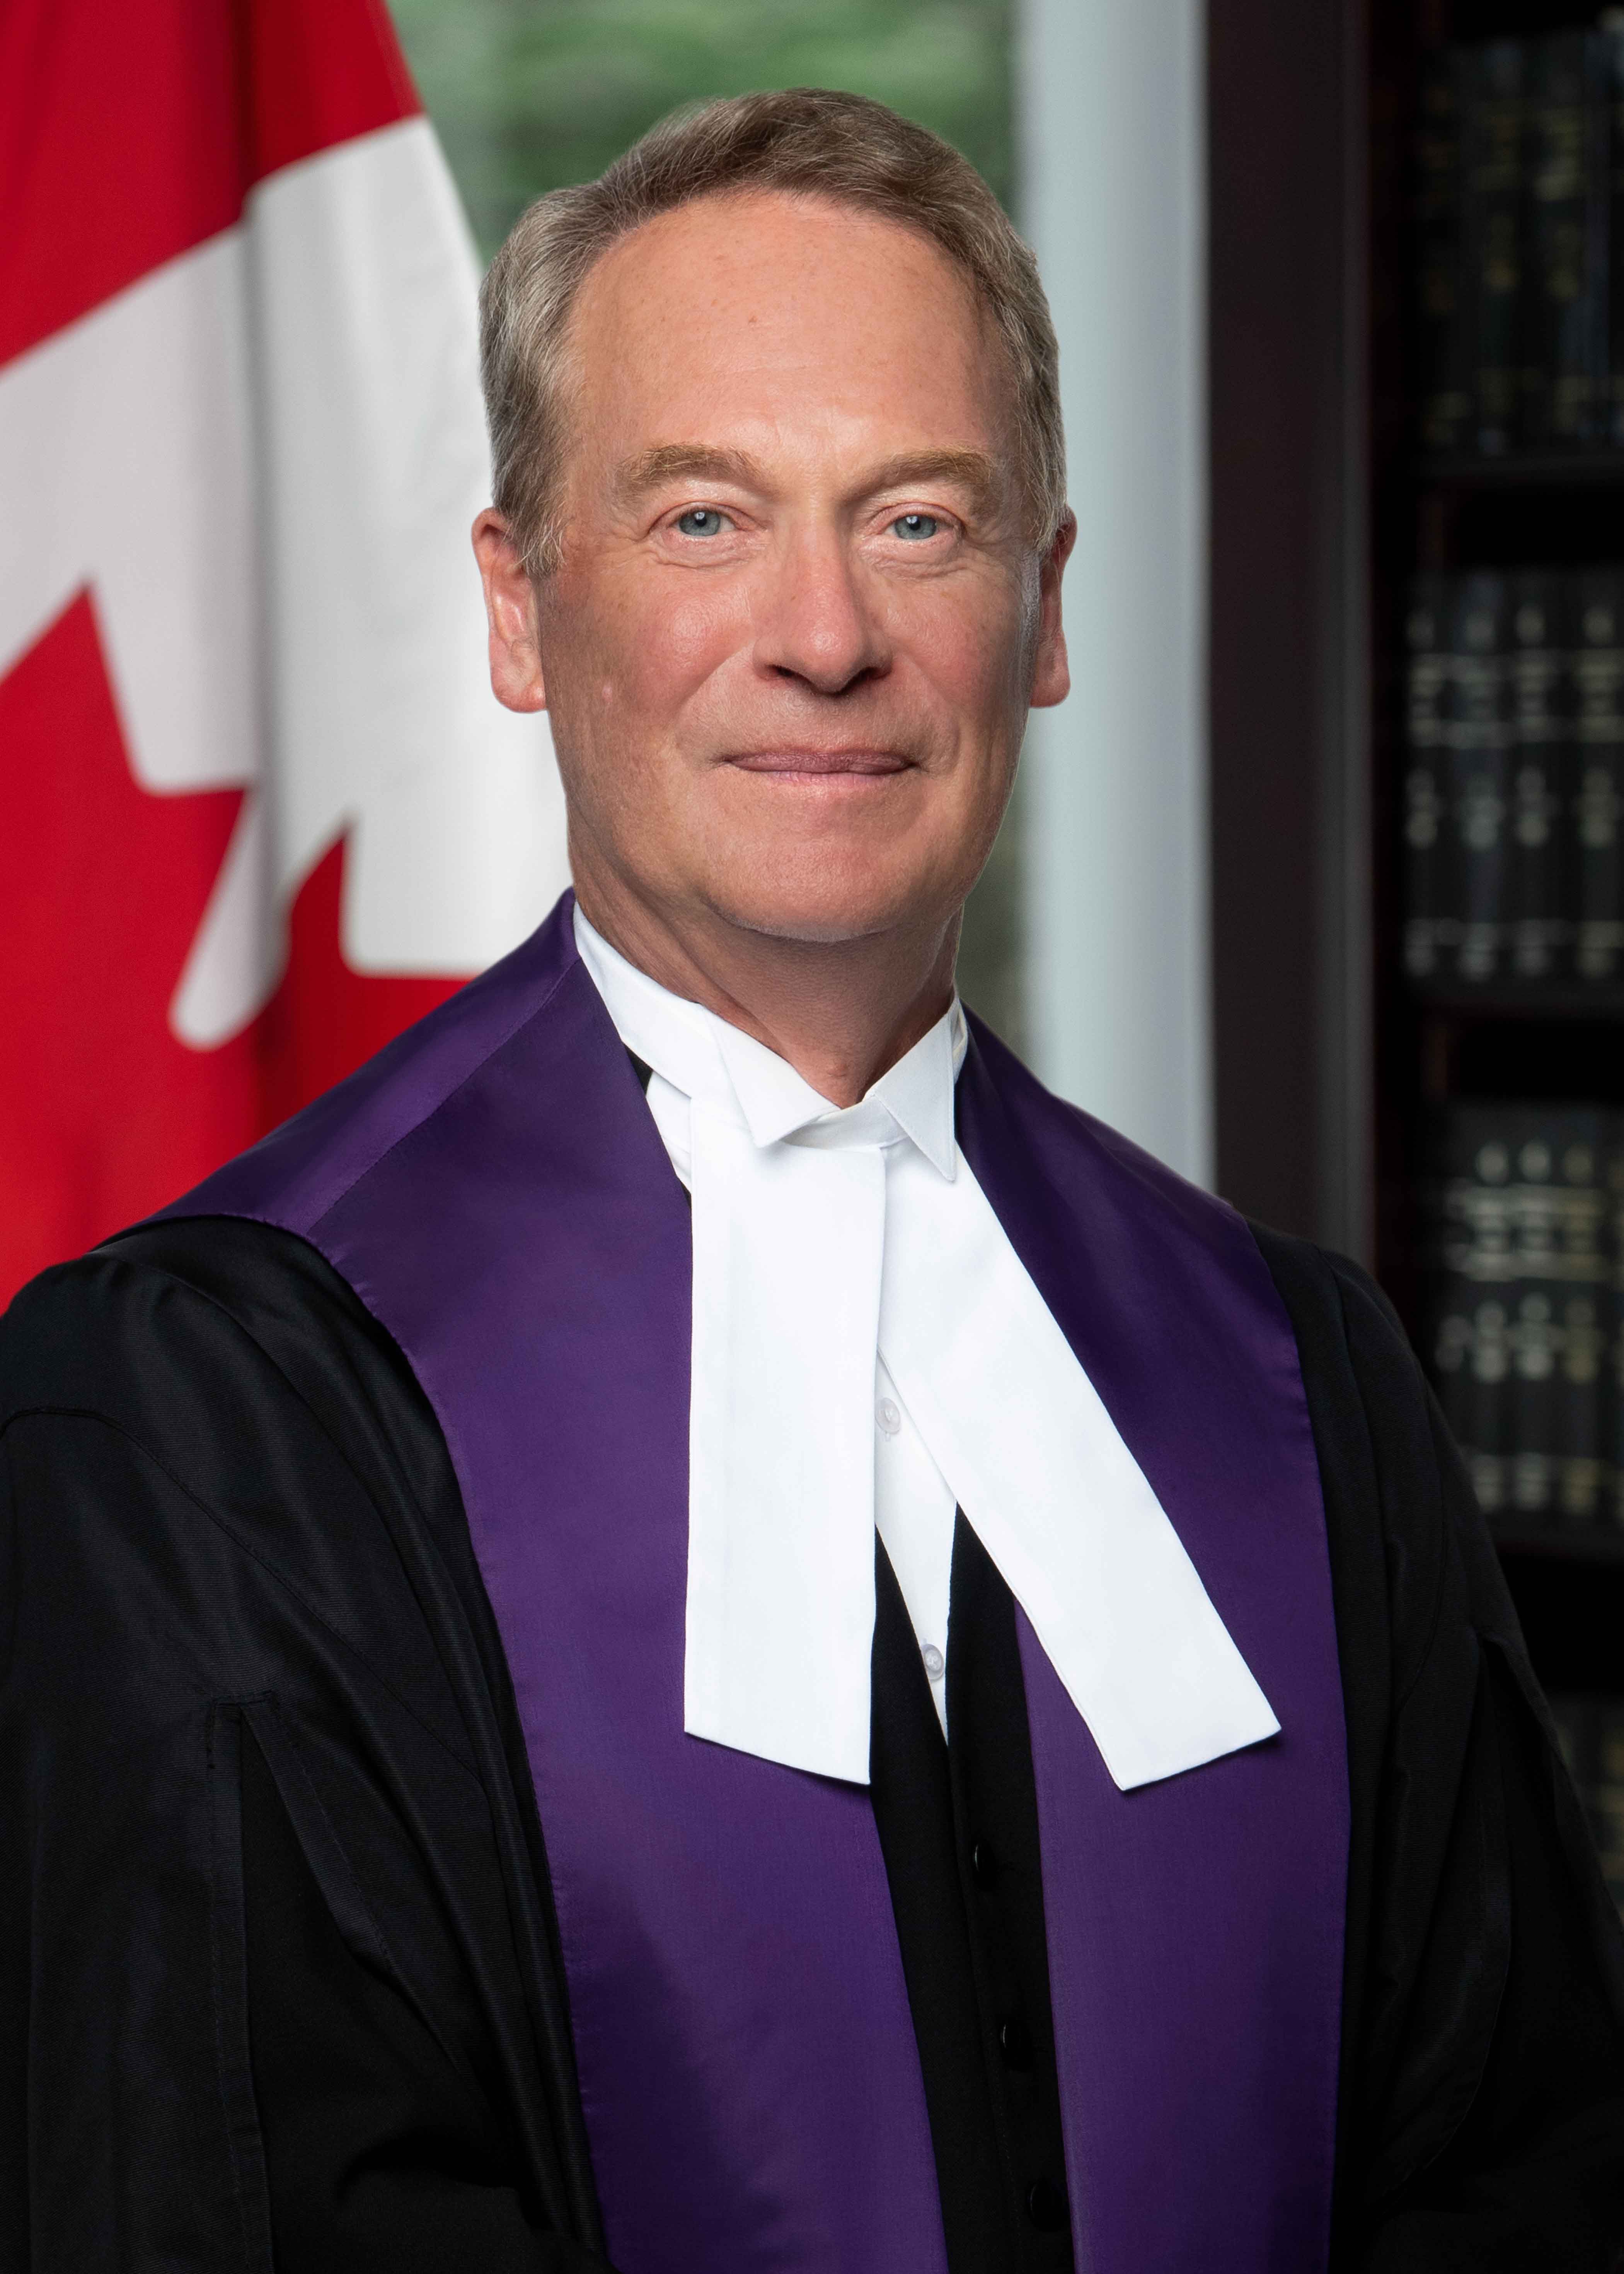 image: L'honorable Bruce Russell